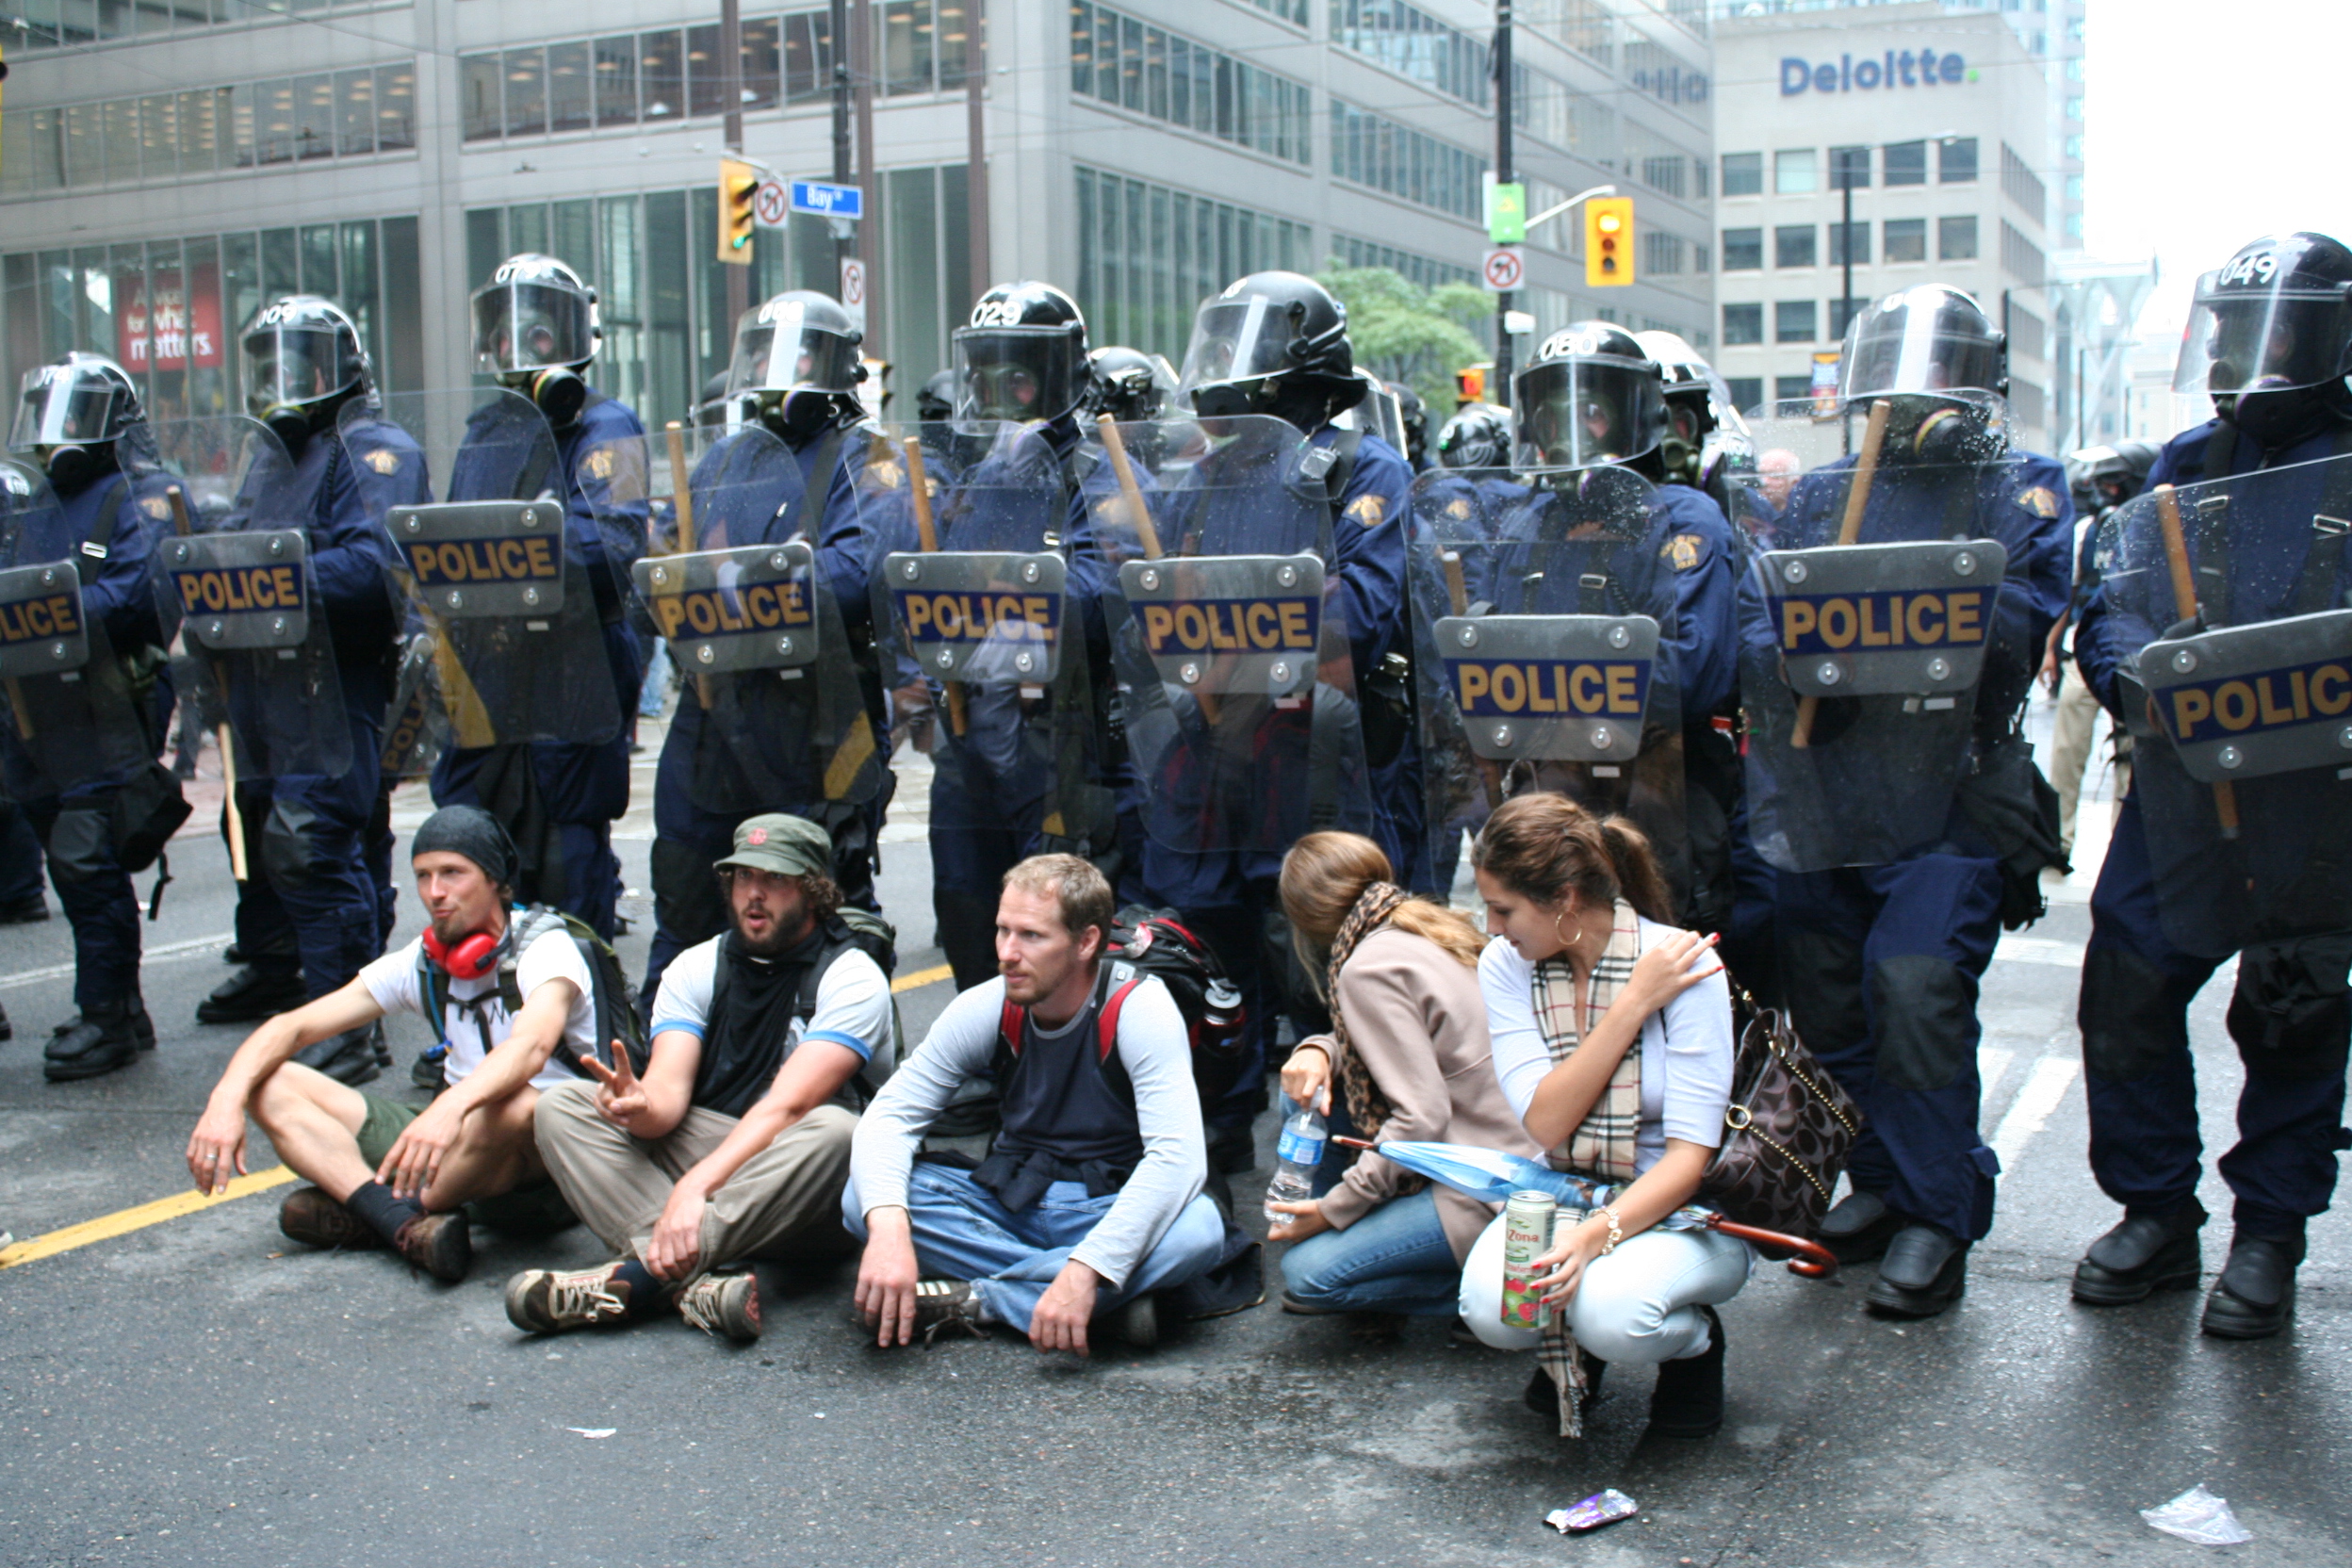 G20 protesters in Toronto sit in front of a line of riot police